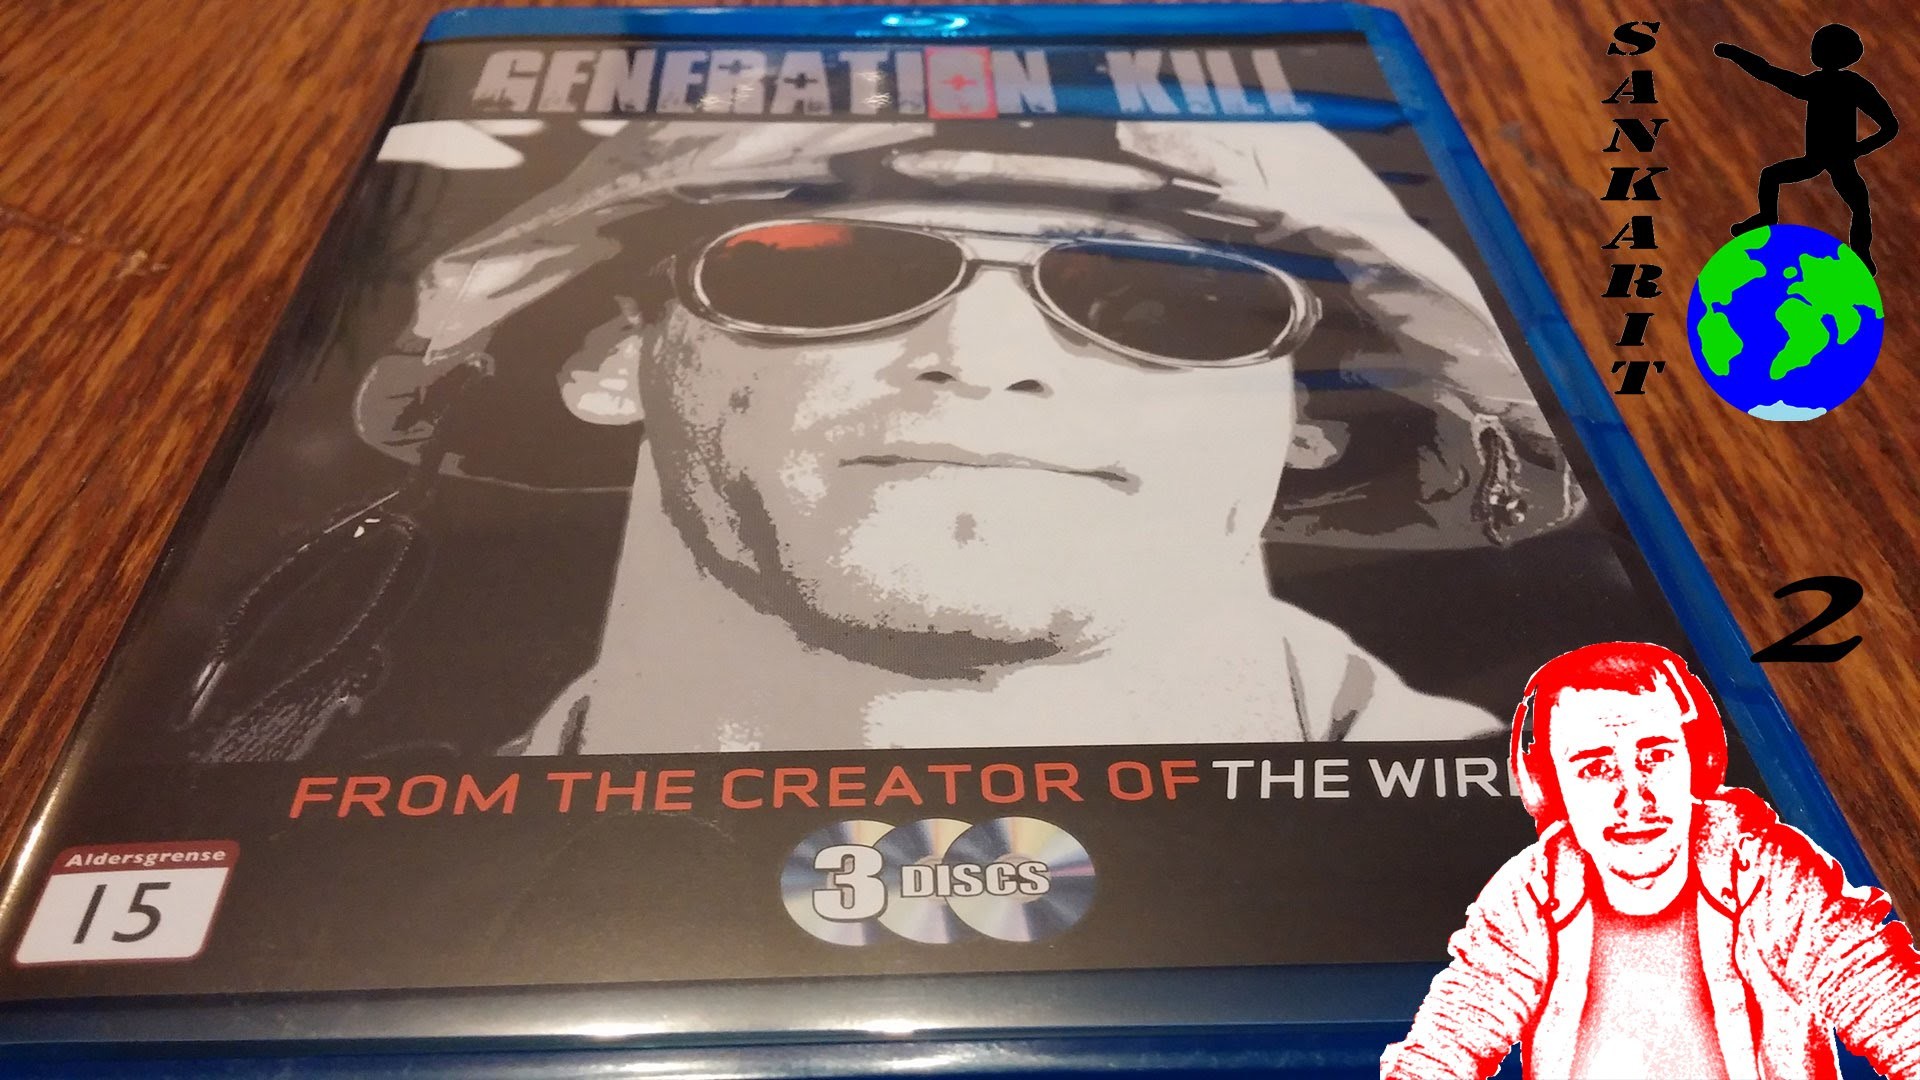 1920x1080 Unboxing Generation Kill - Complete Series (Blu-ray)